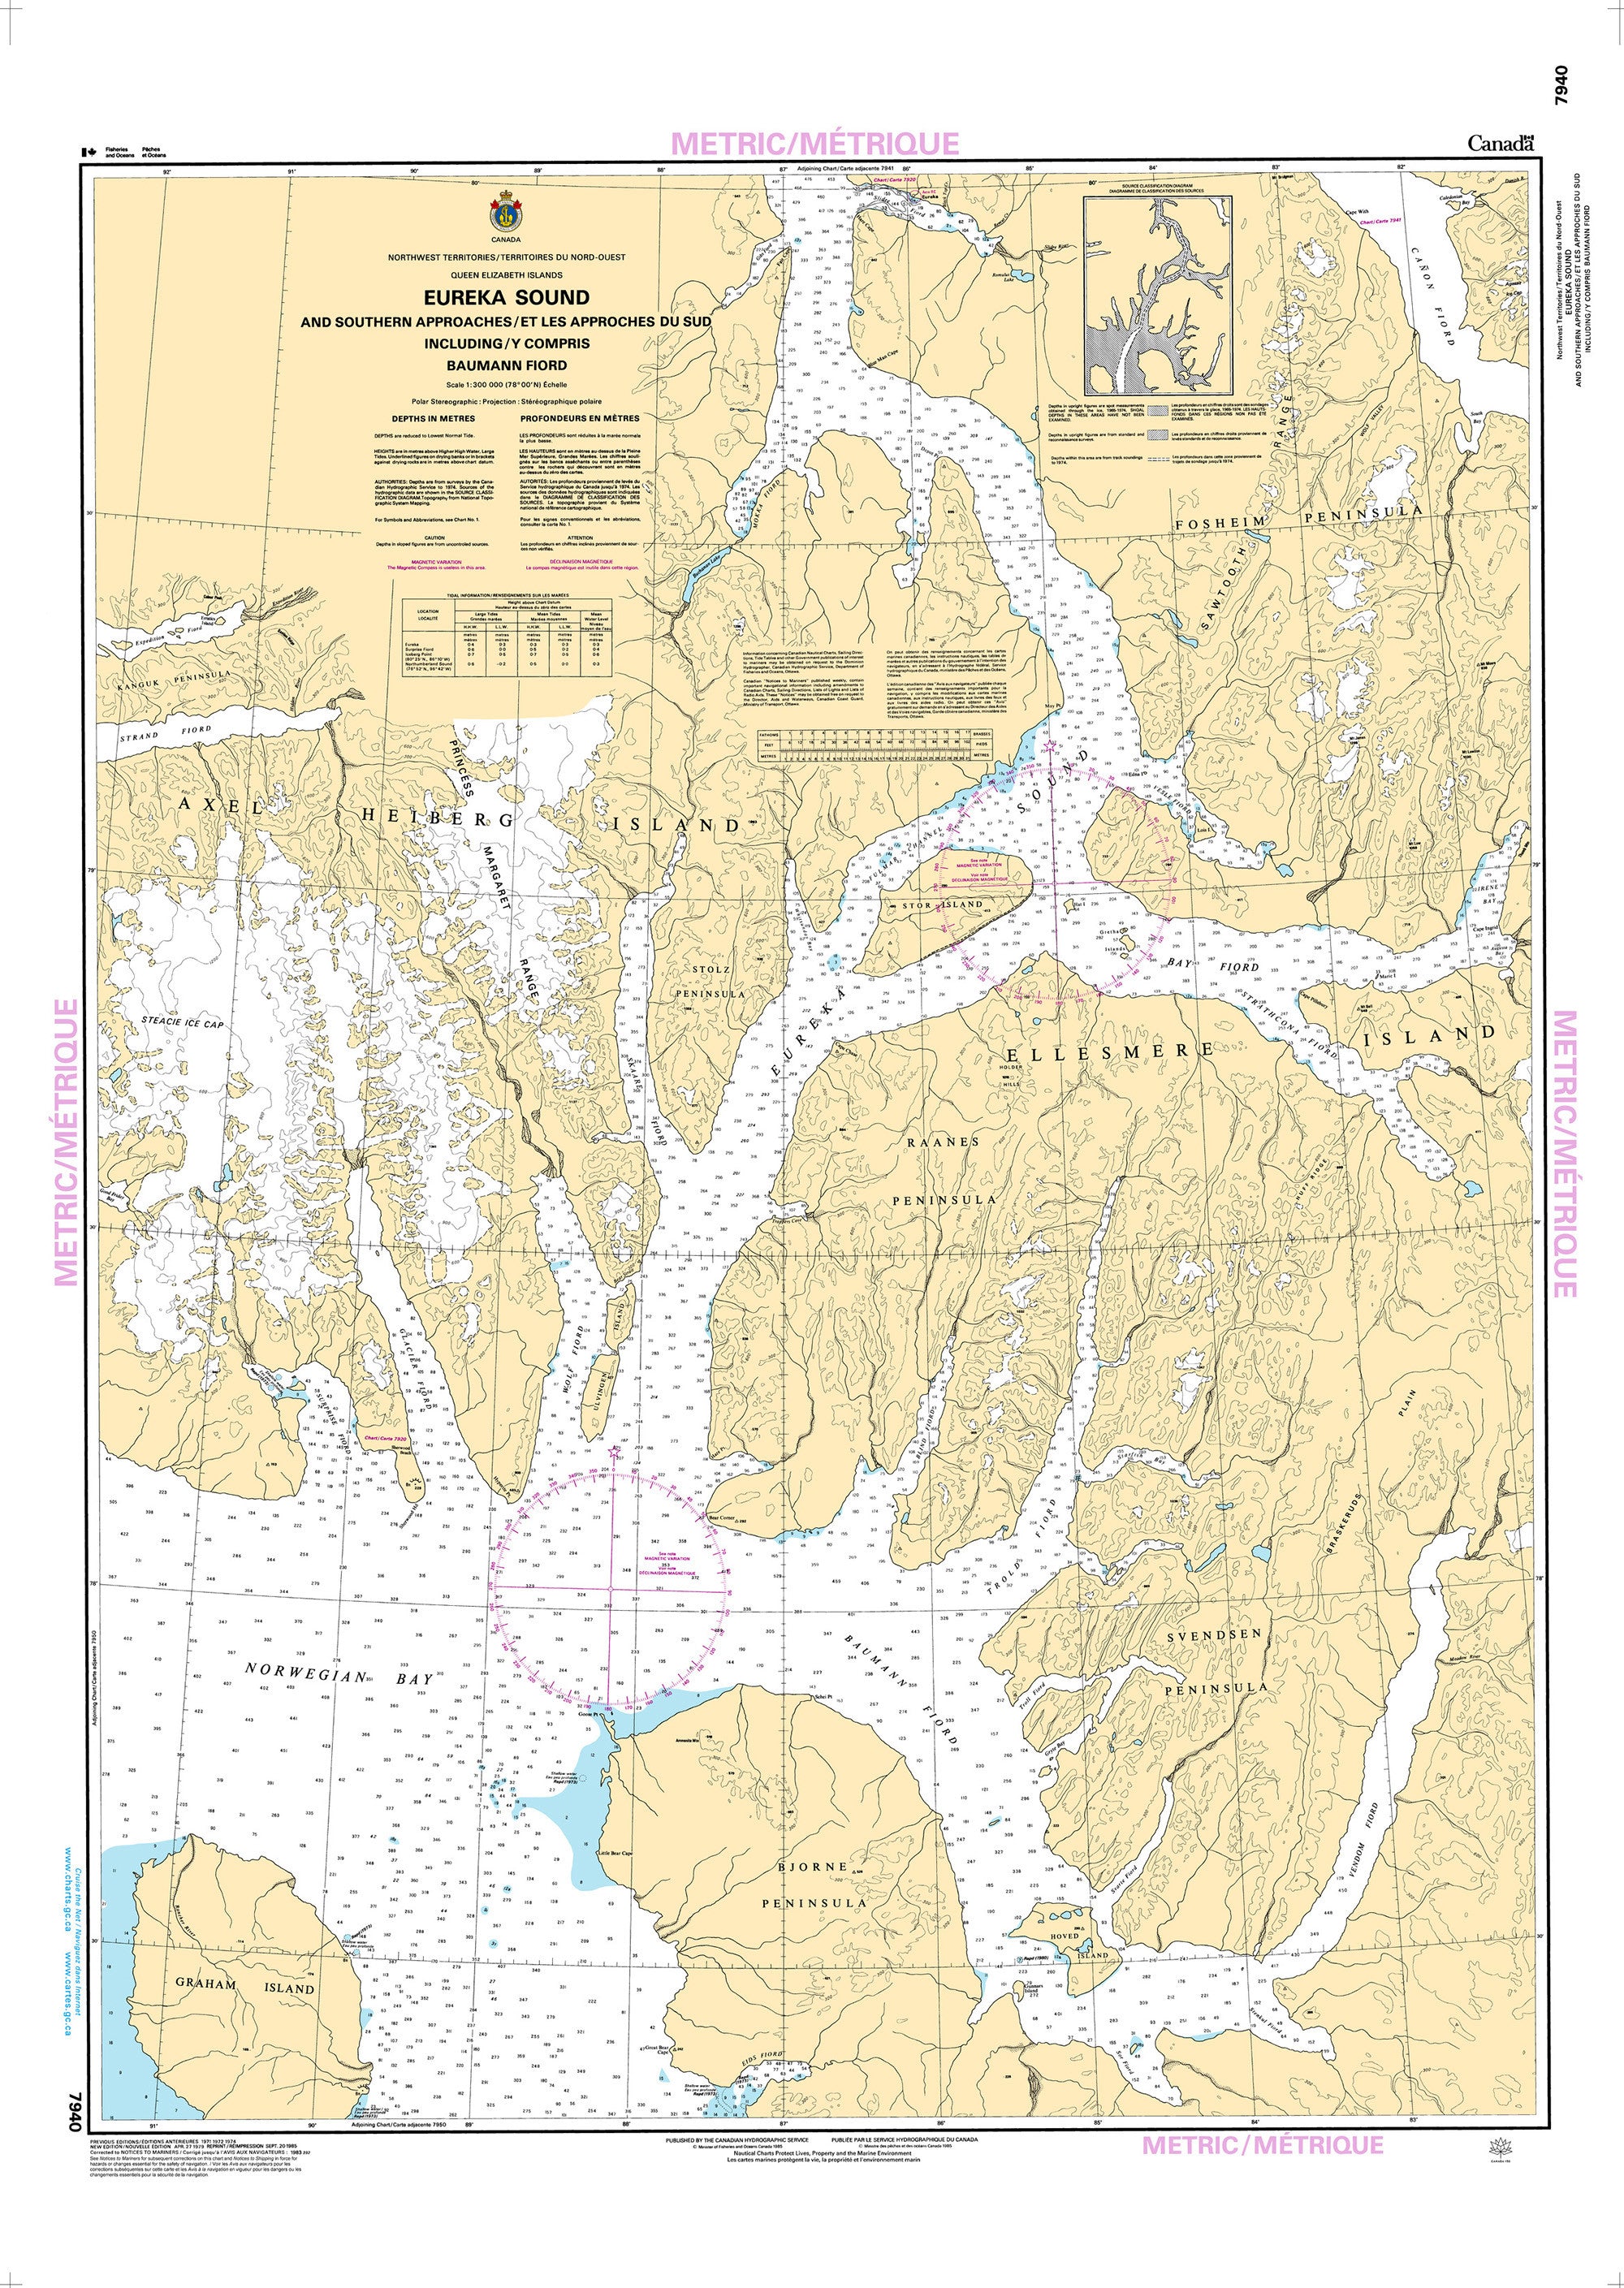 Canadian Hydrographic Service Nautical Chart CHS7940: Eureka South and Southern Approaches/et Les Approches Du Sud Including/y Compris Baumann Fiord